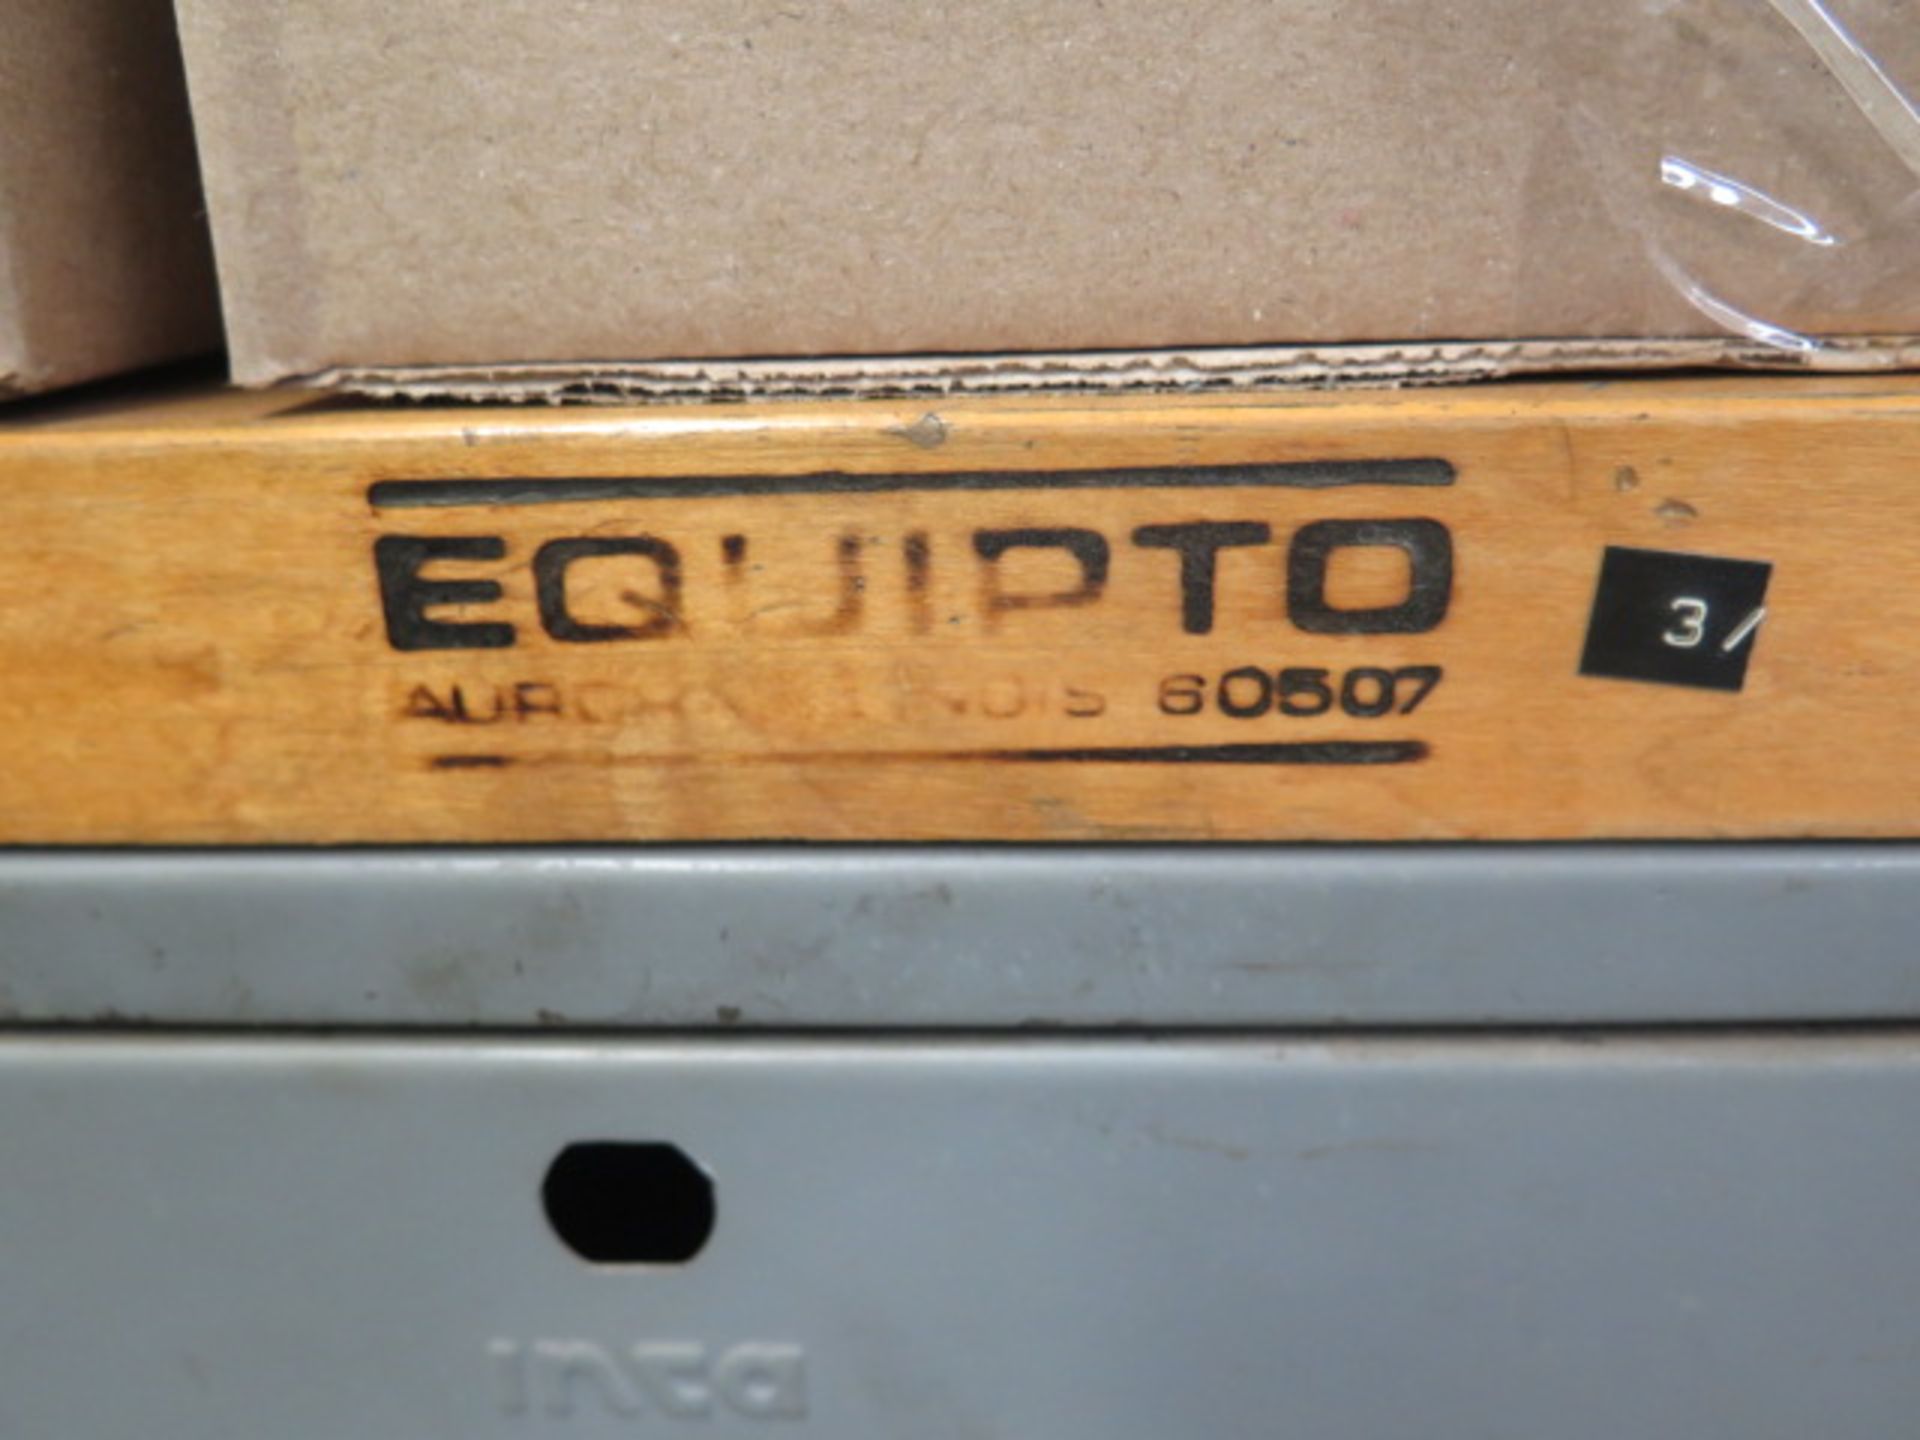 Equipto Maple Top Work Bench (SOLD AS-IS - NO WARRANTY) - Image 5 of 5